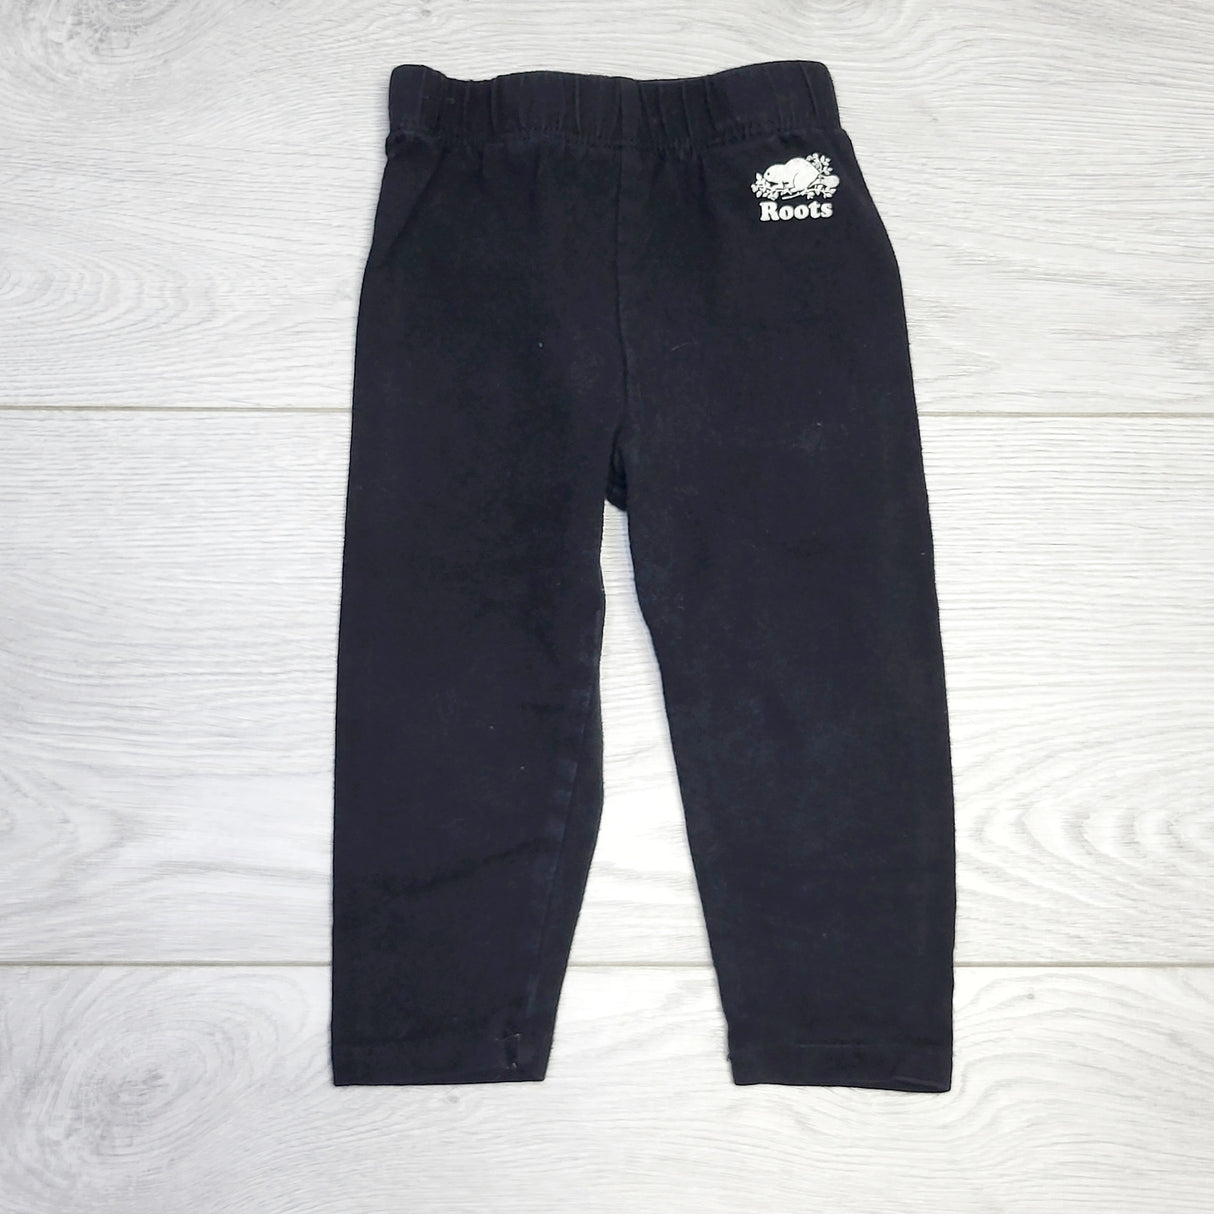 RZA2 - Roots black leggings. Size 6-12 months